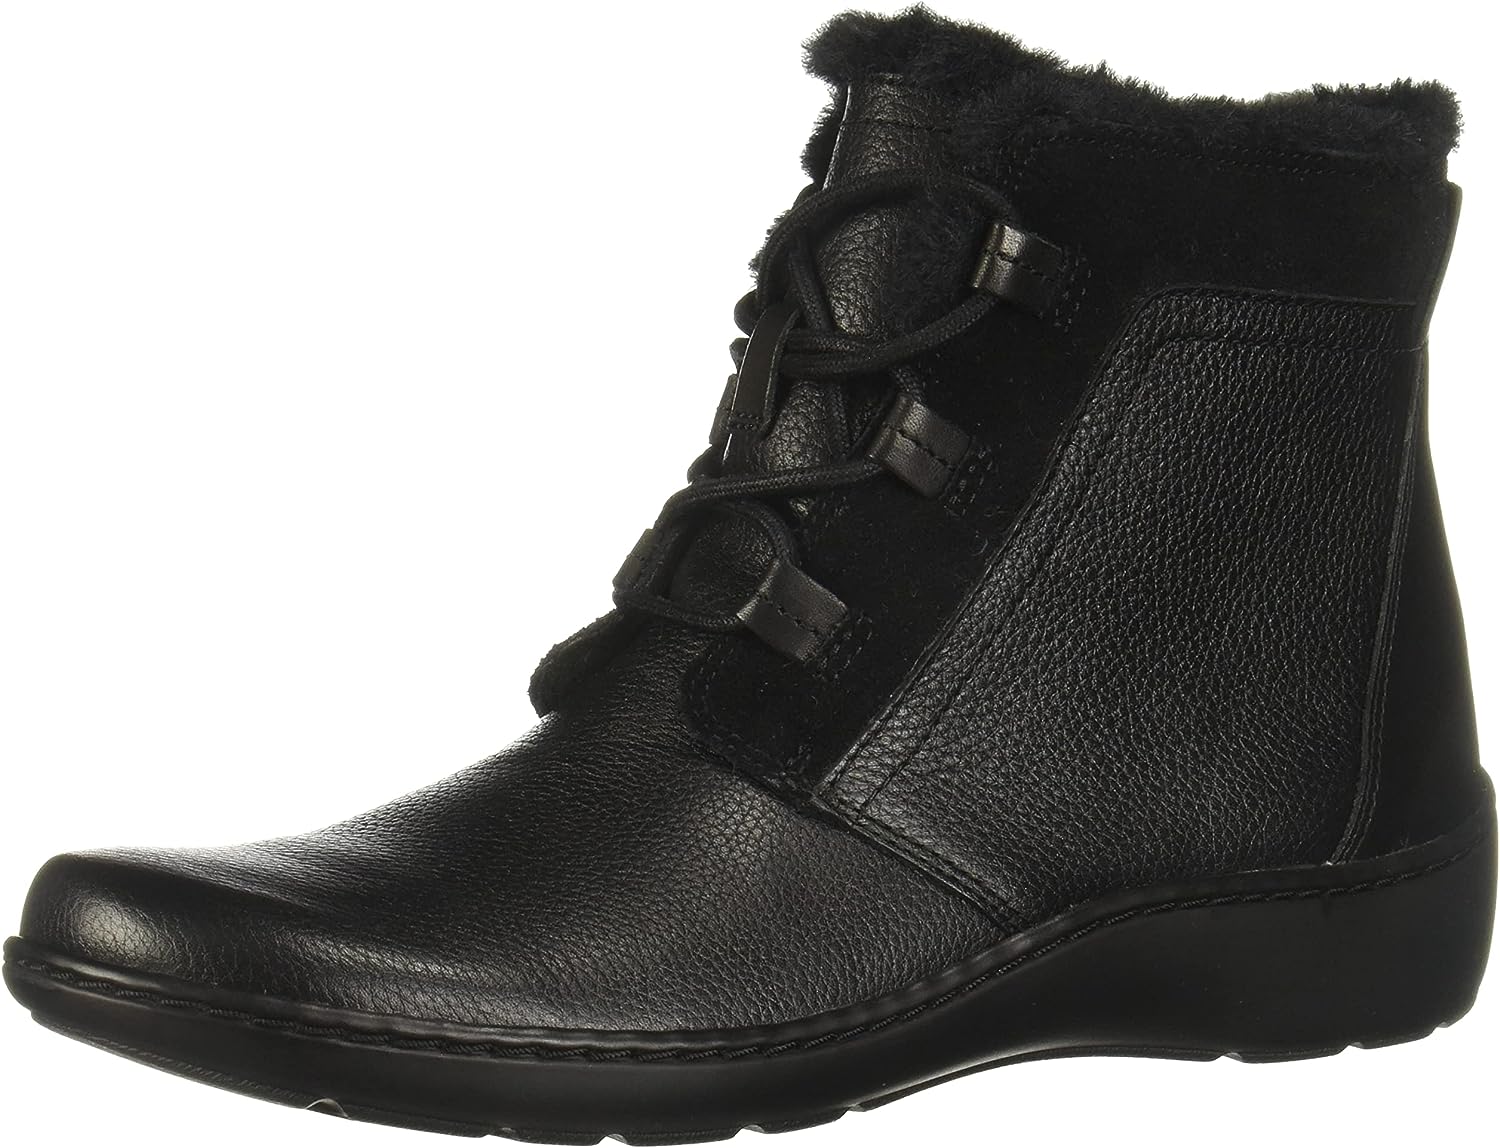 Clarks Women's Cora Chai Ankle Boot